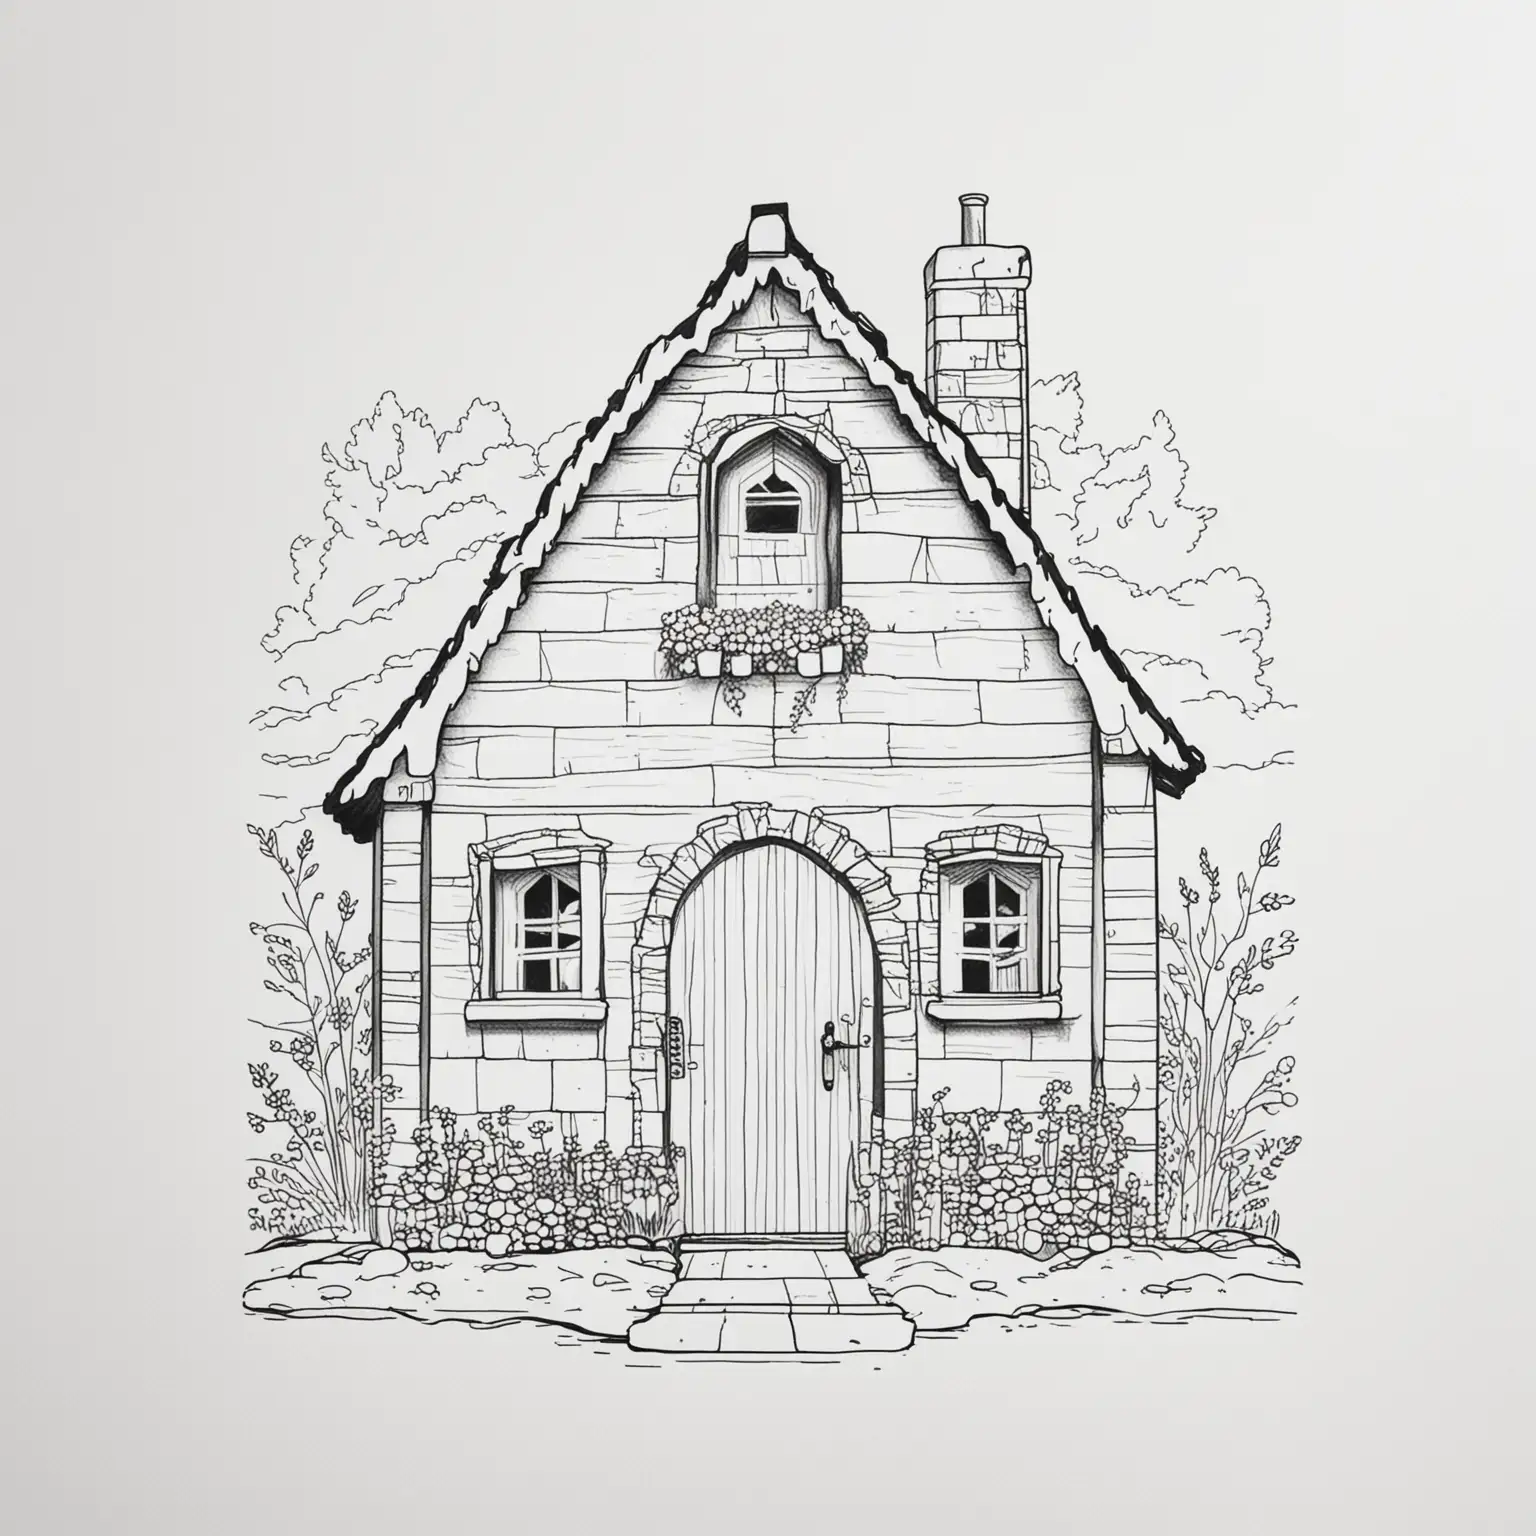 minimalist coloring page, cottage core, white background